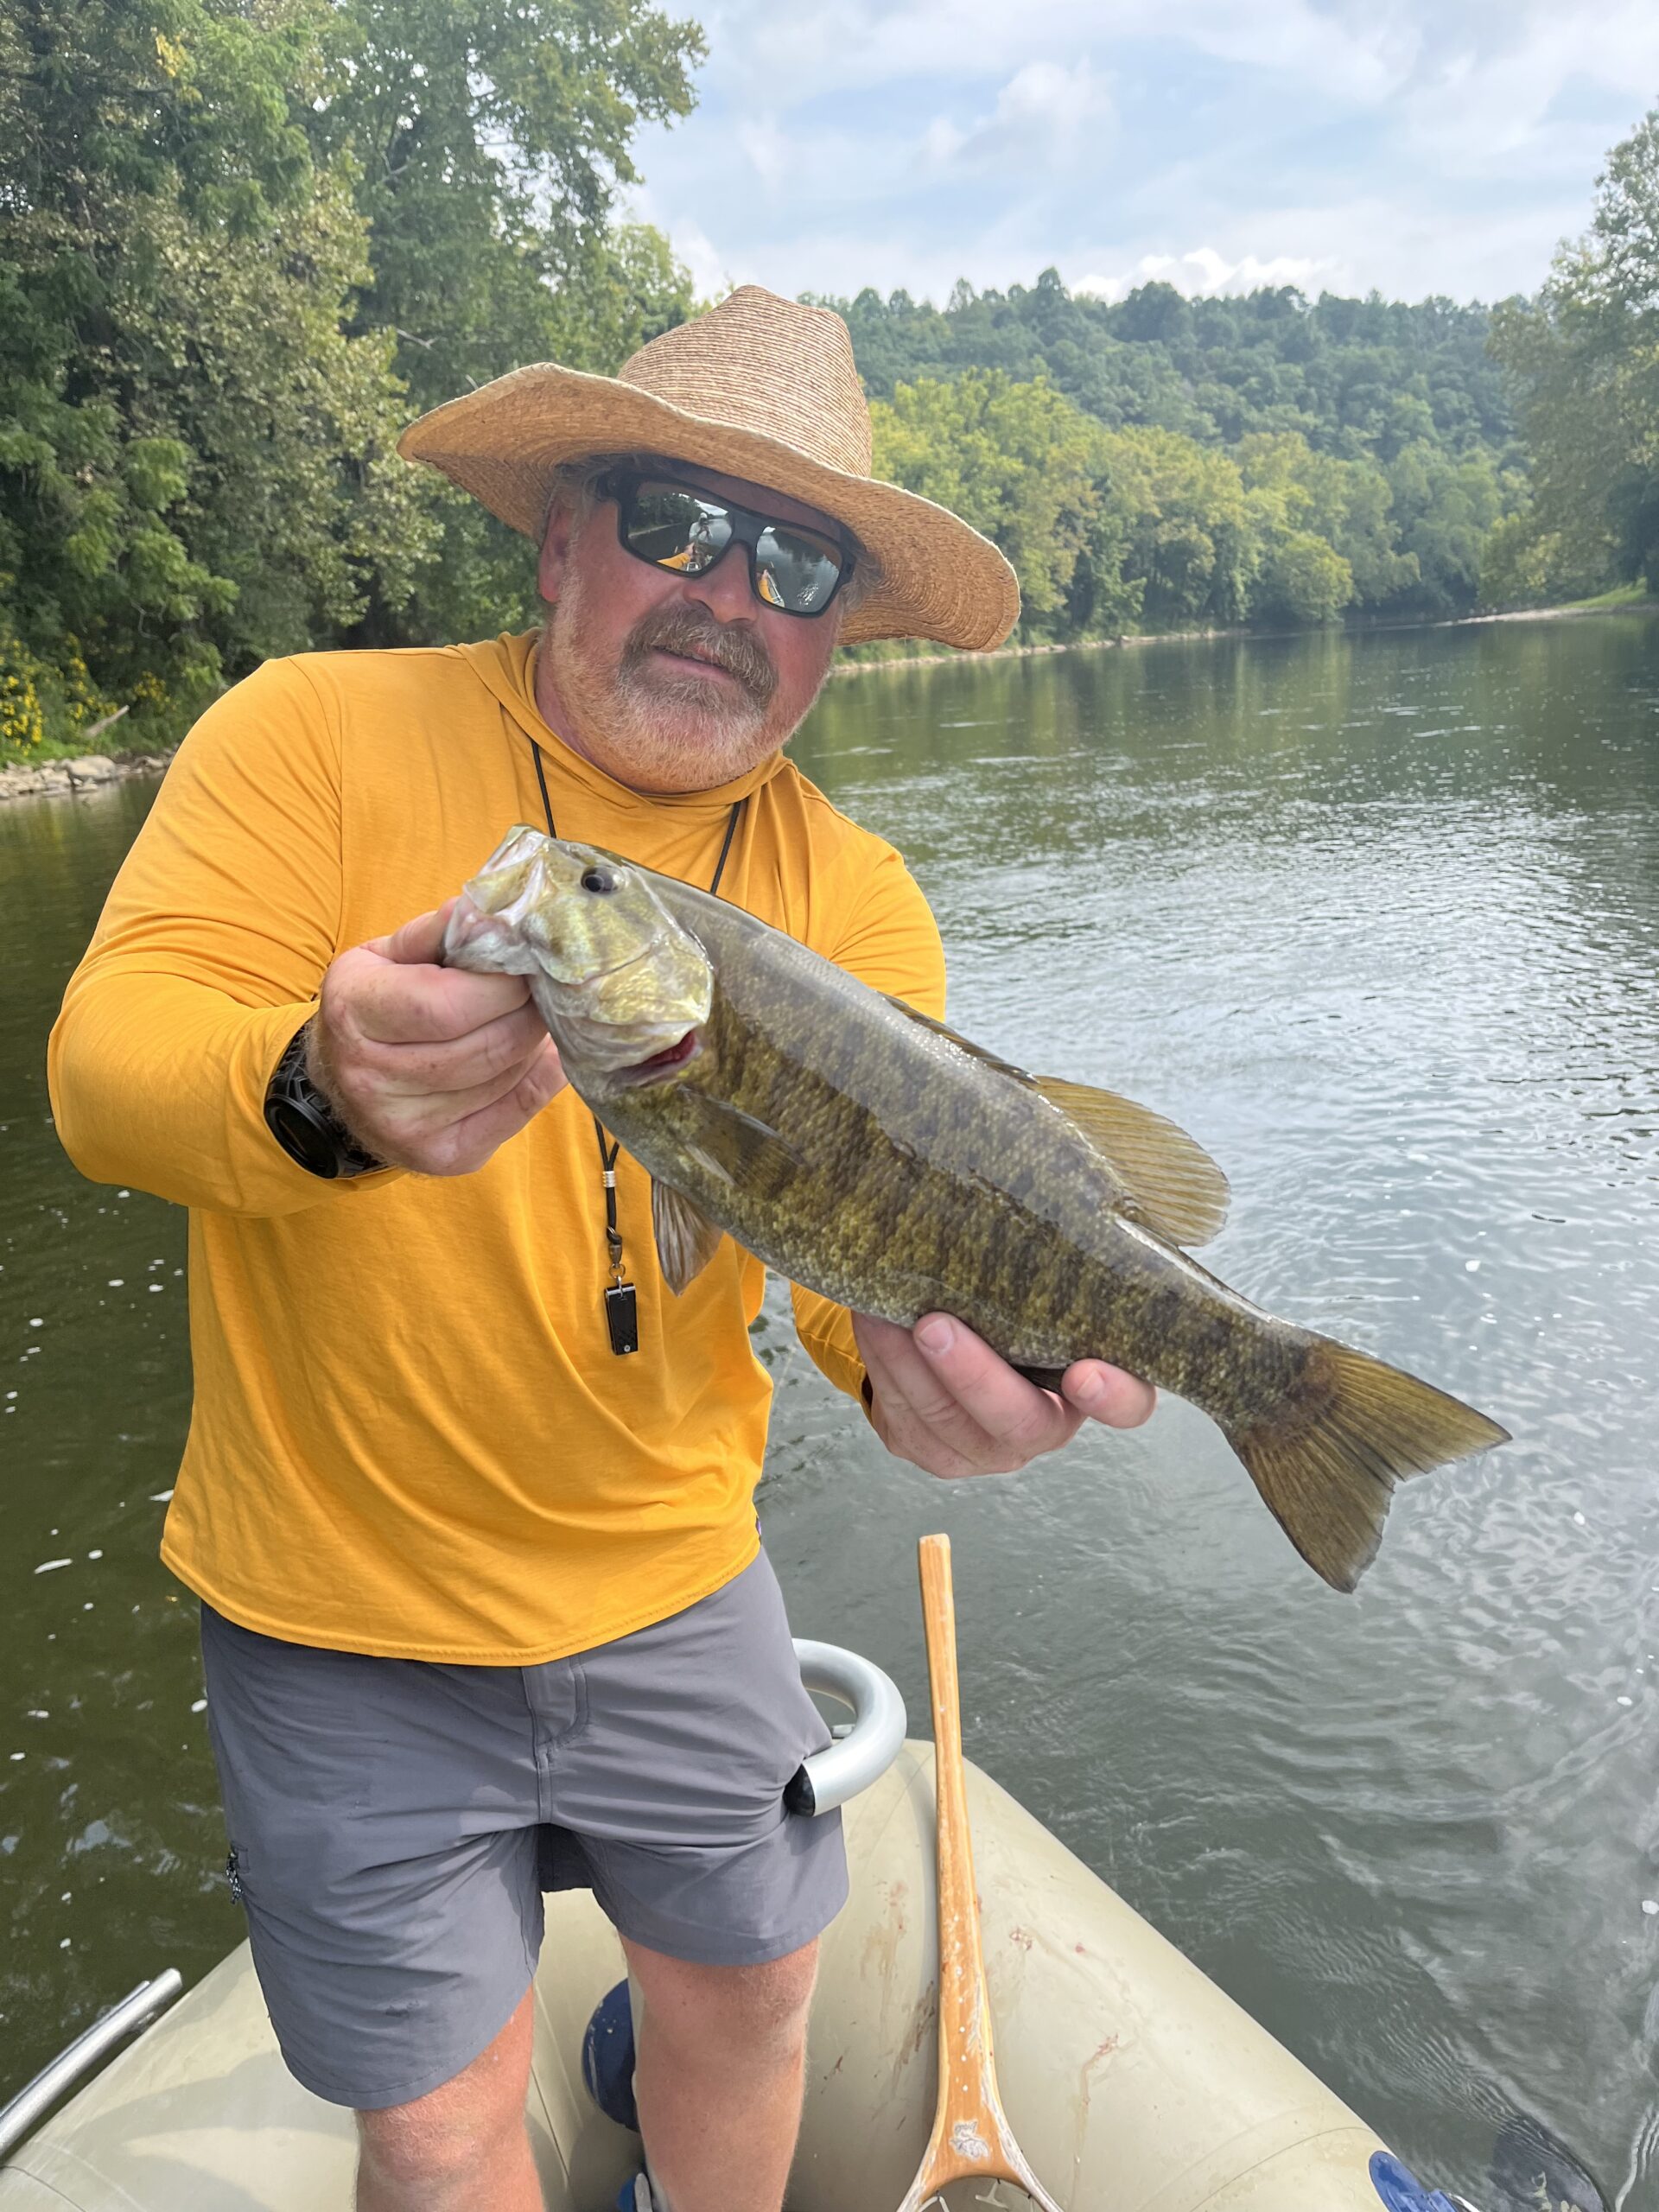 5 Questions with Jay Waide of Roanoke Angler, the Newest Fly Shop